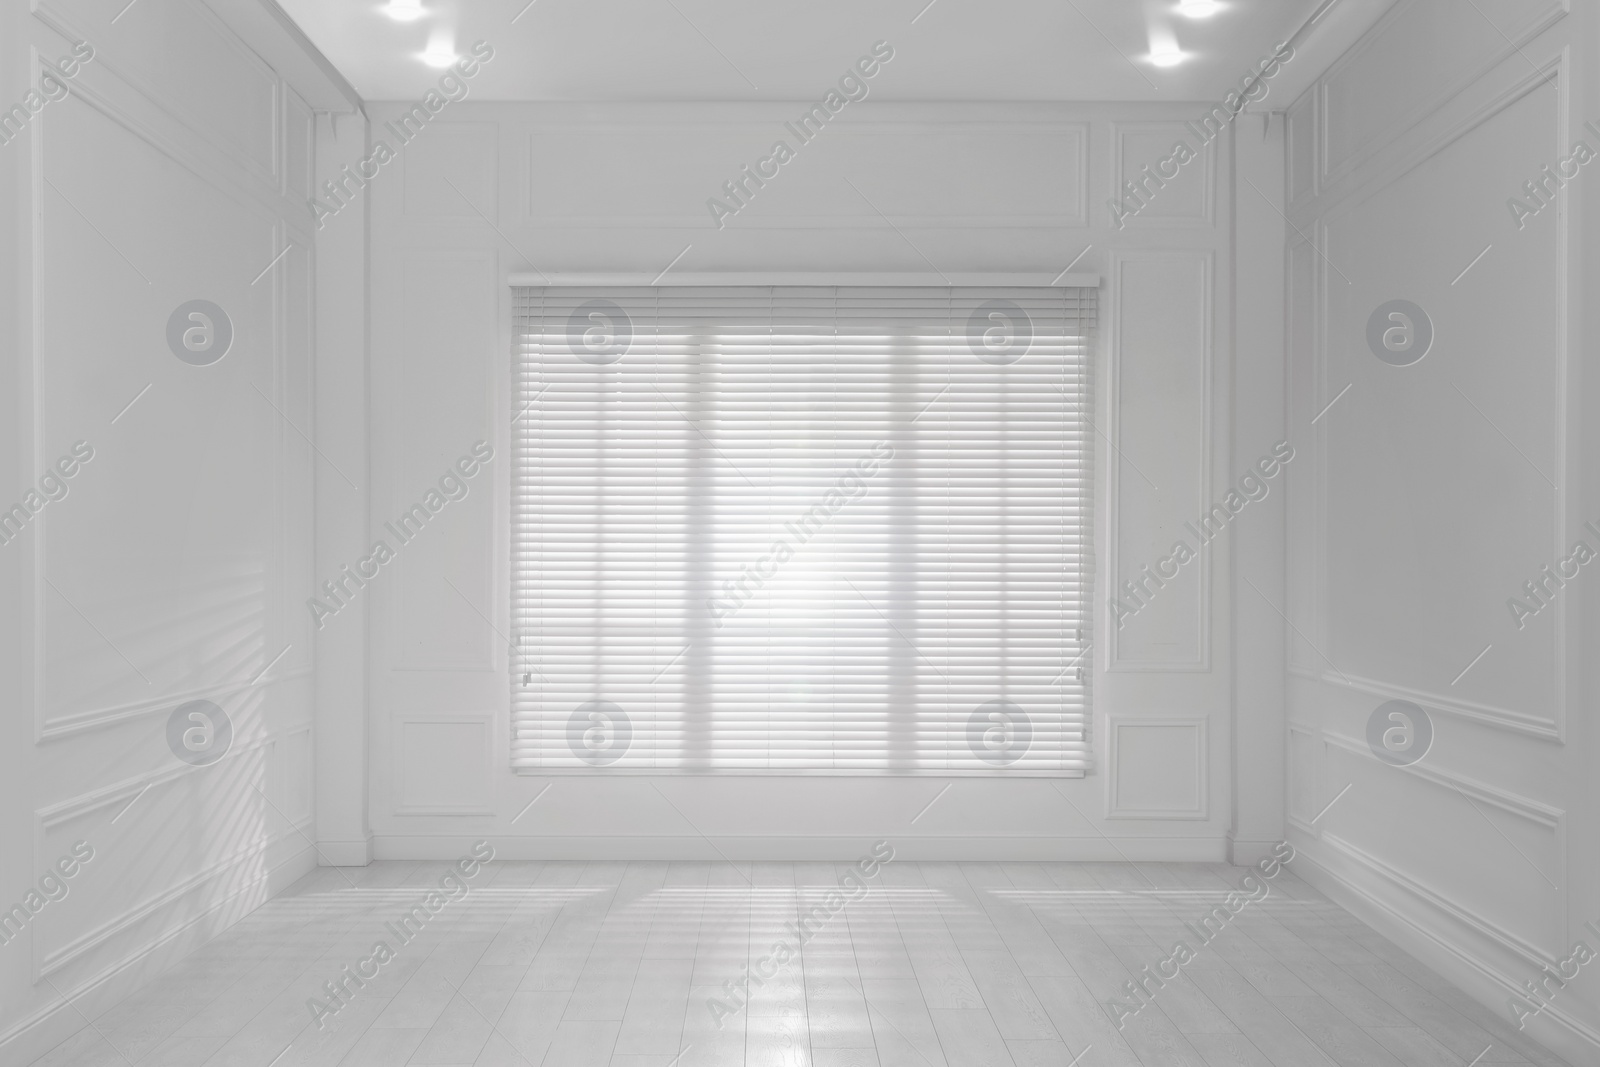 Photo of Empty room with white walls, large window and wooden floor